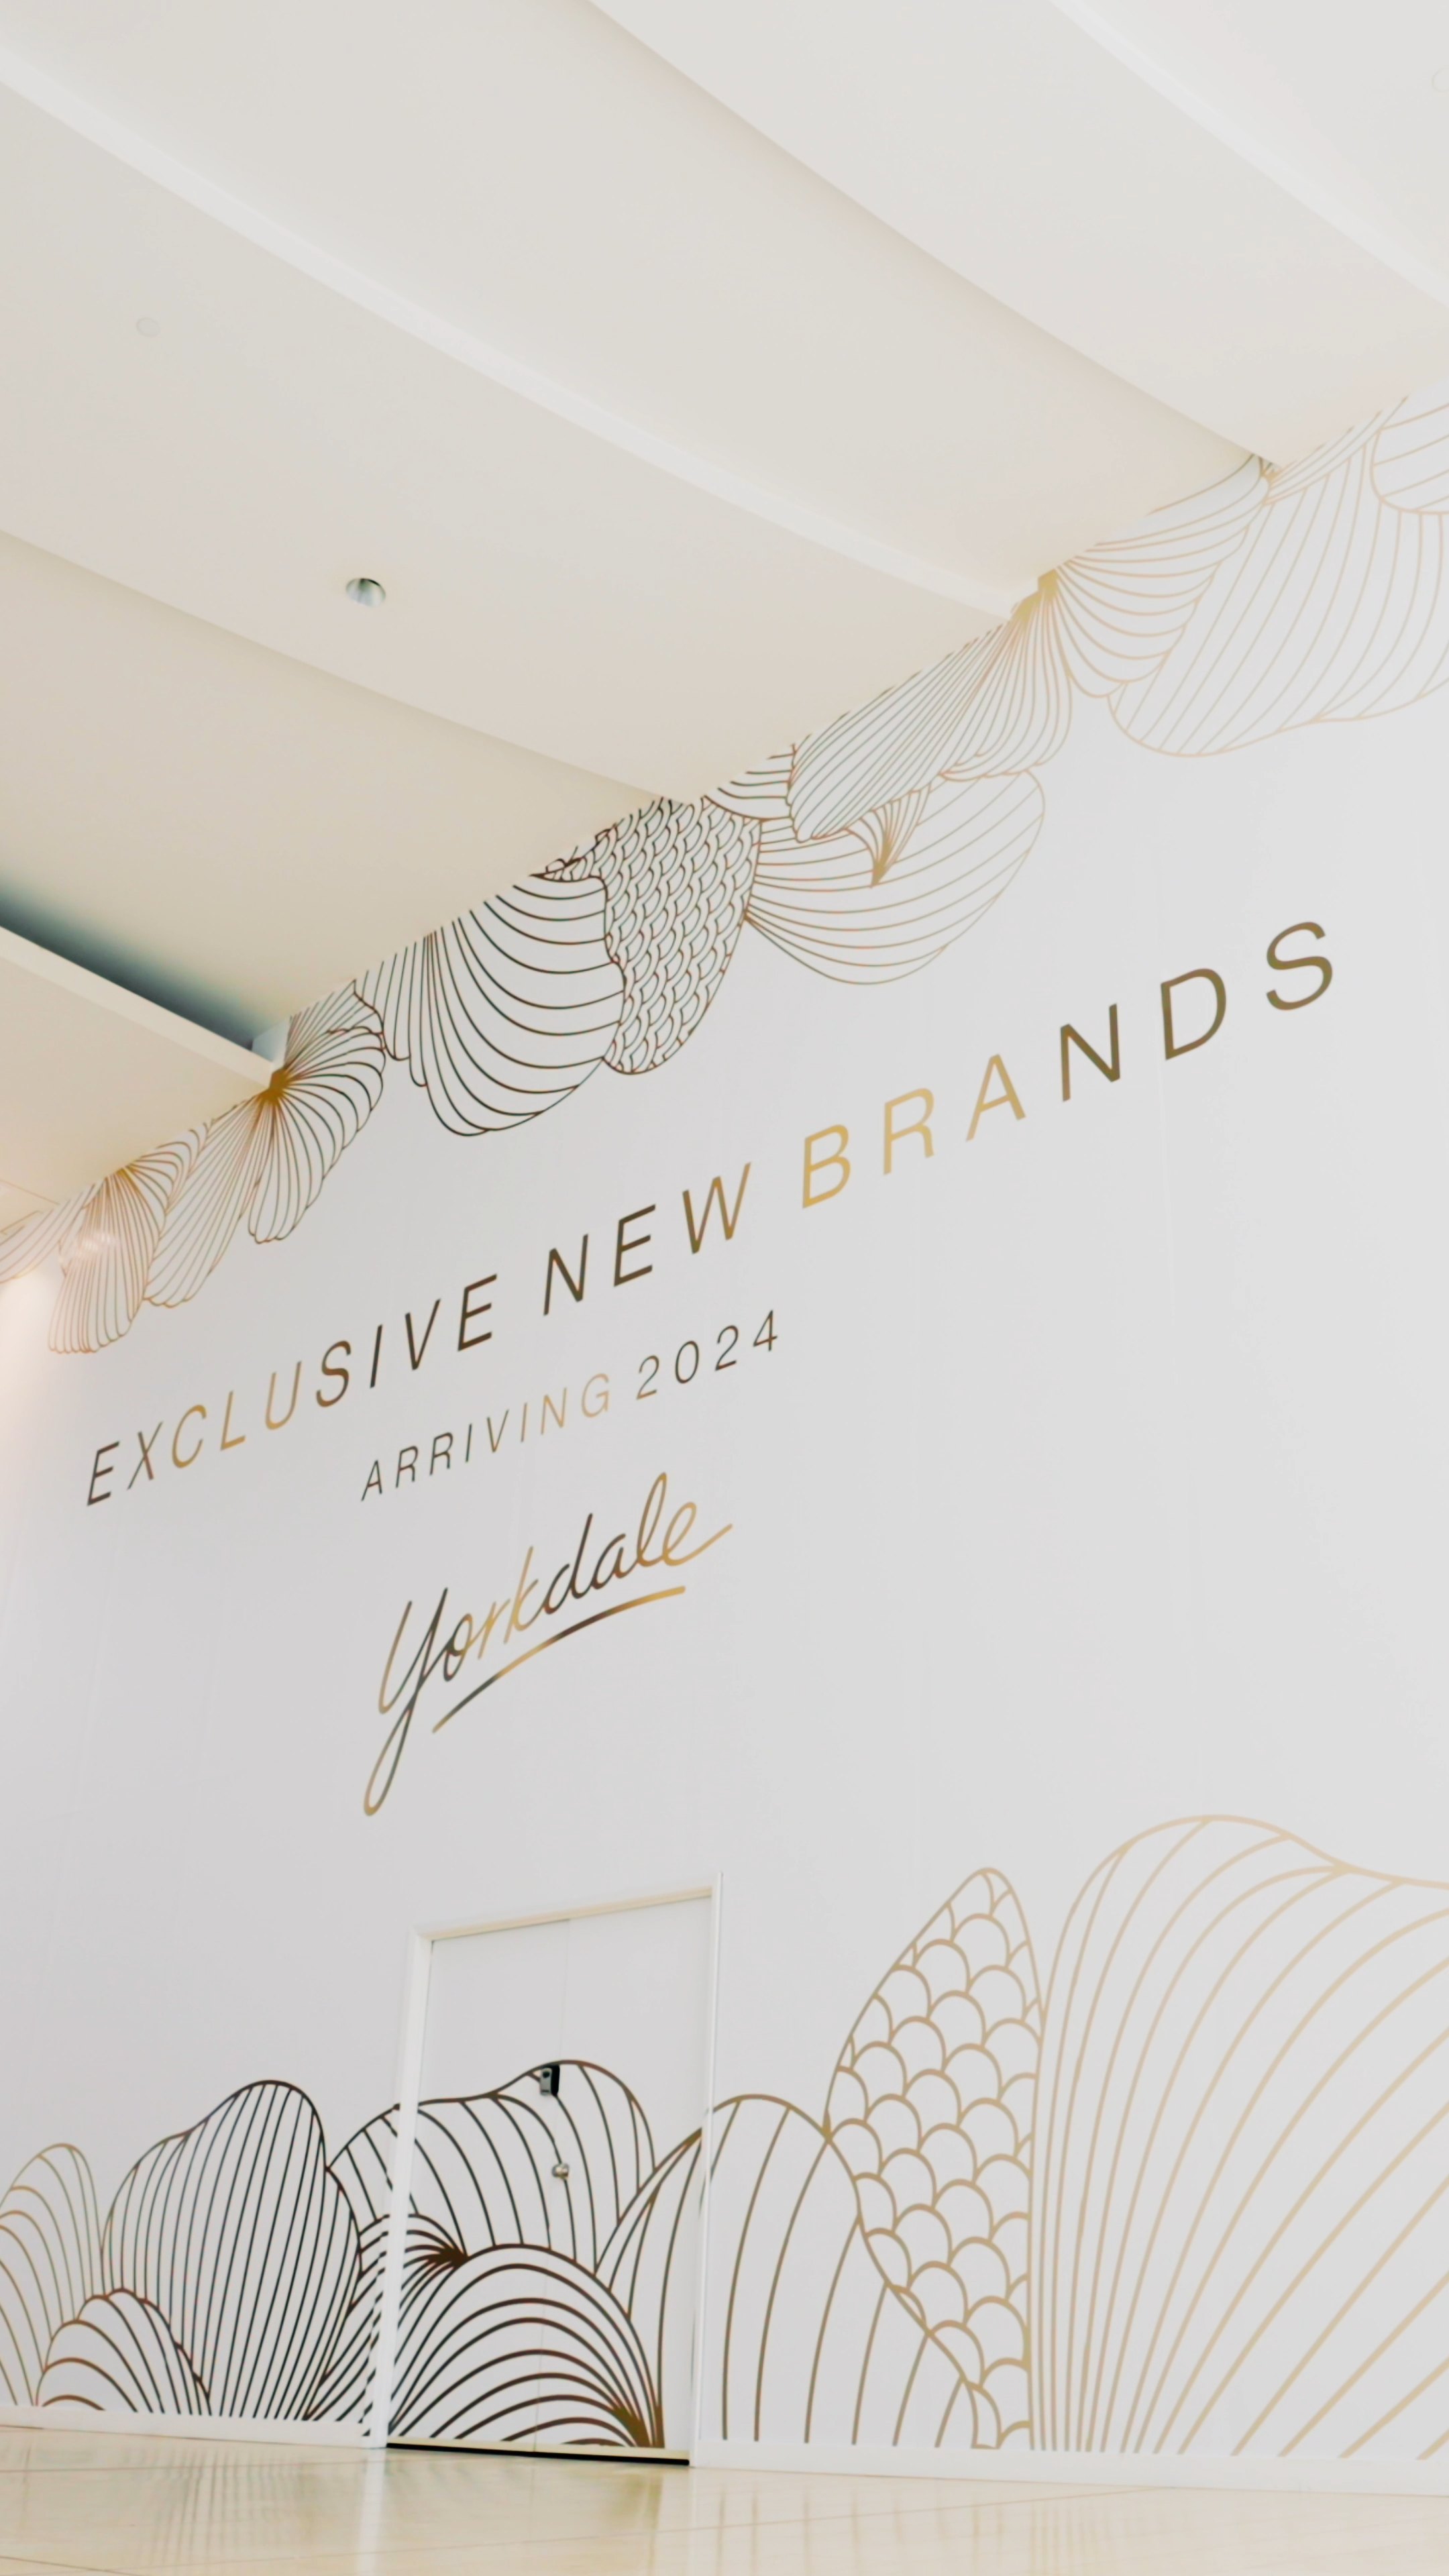 Hoarding of exclusive new brands arriving at Yorkdale in 2024.